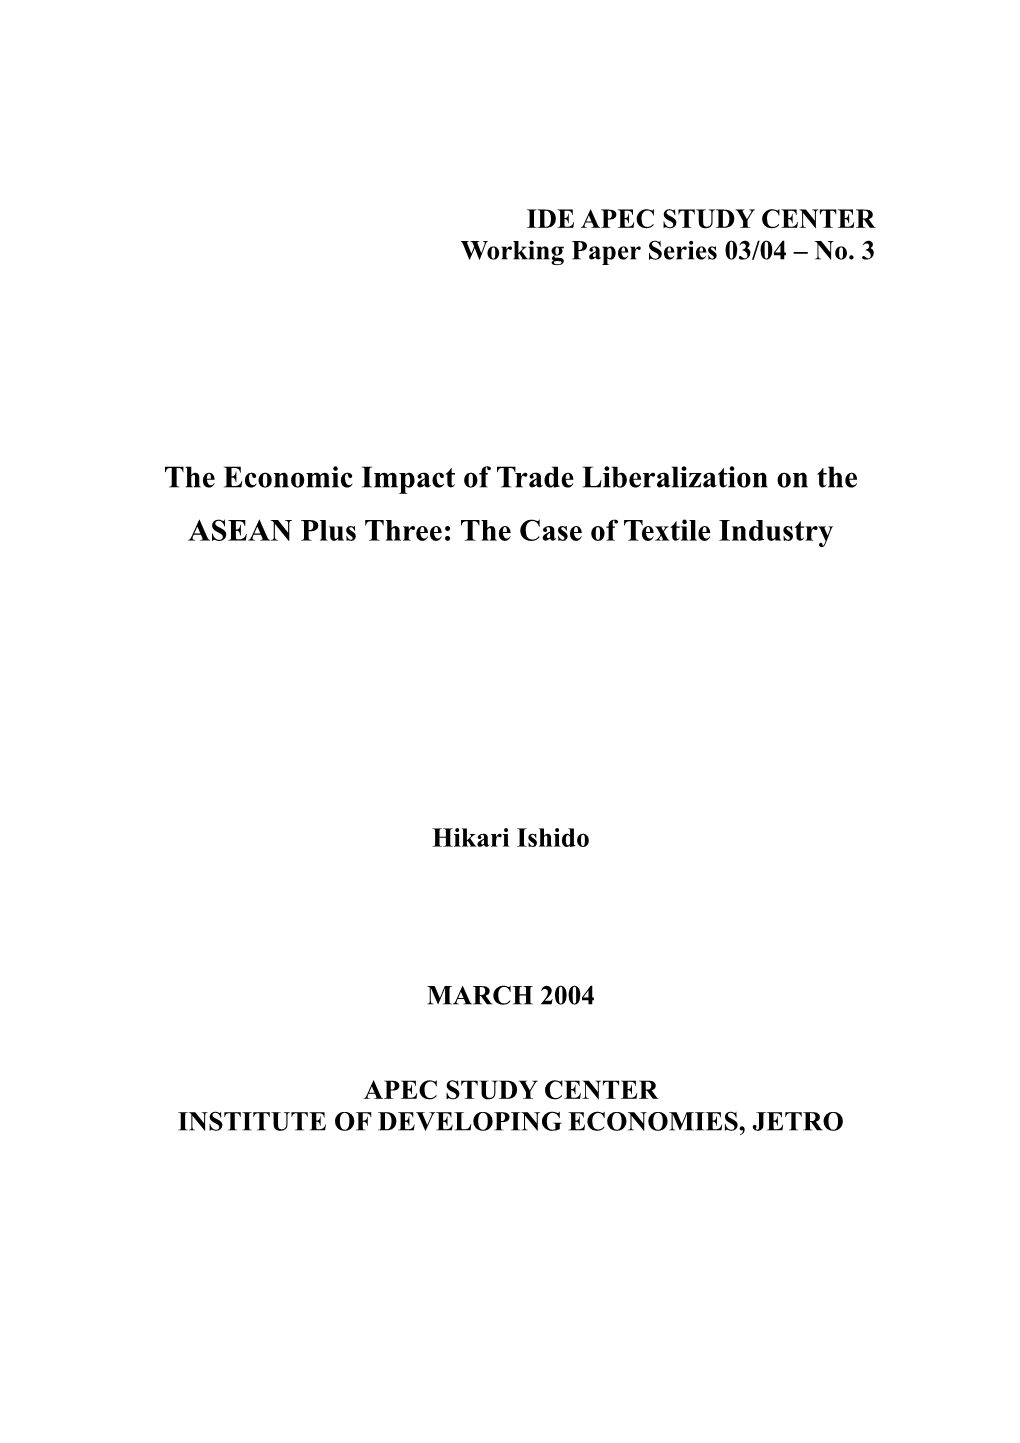 The Economic Impact of Trade Liberalization on the ASEAN Plus Three: the Case of Textile Industry